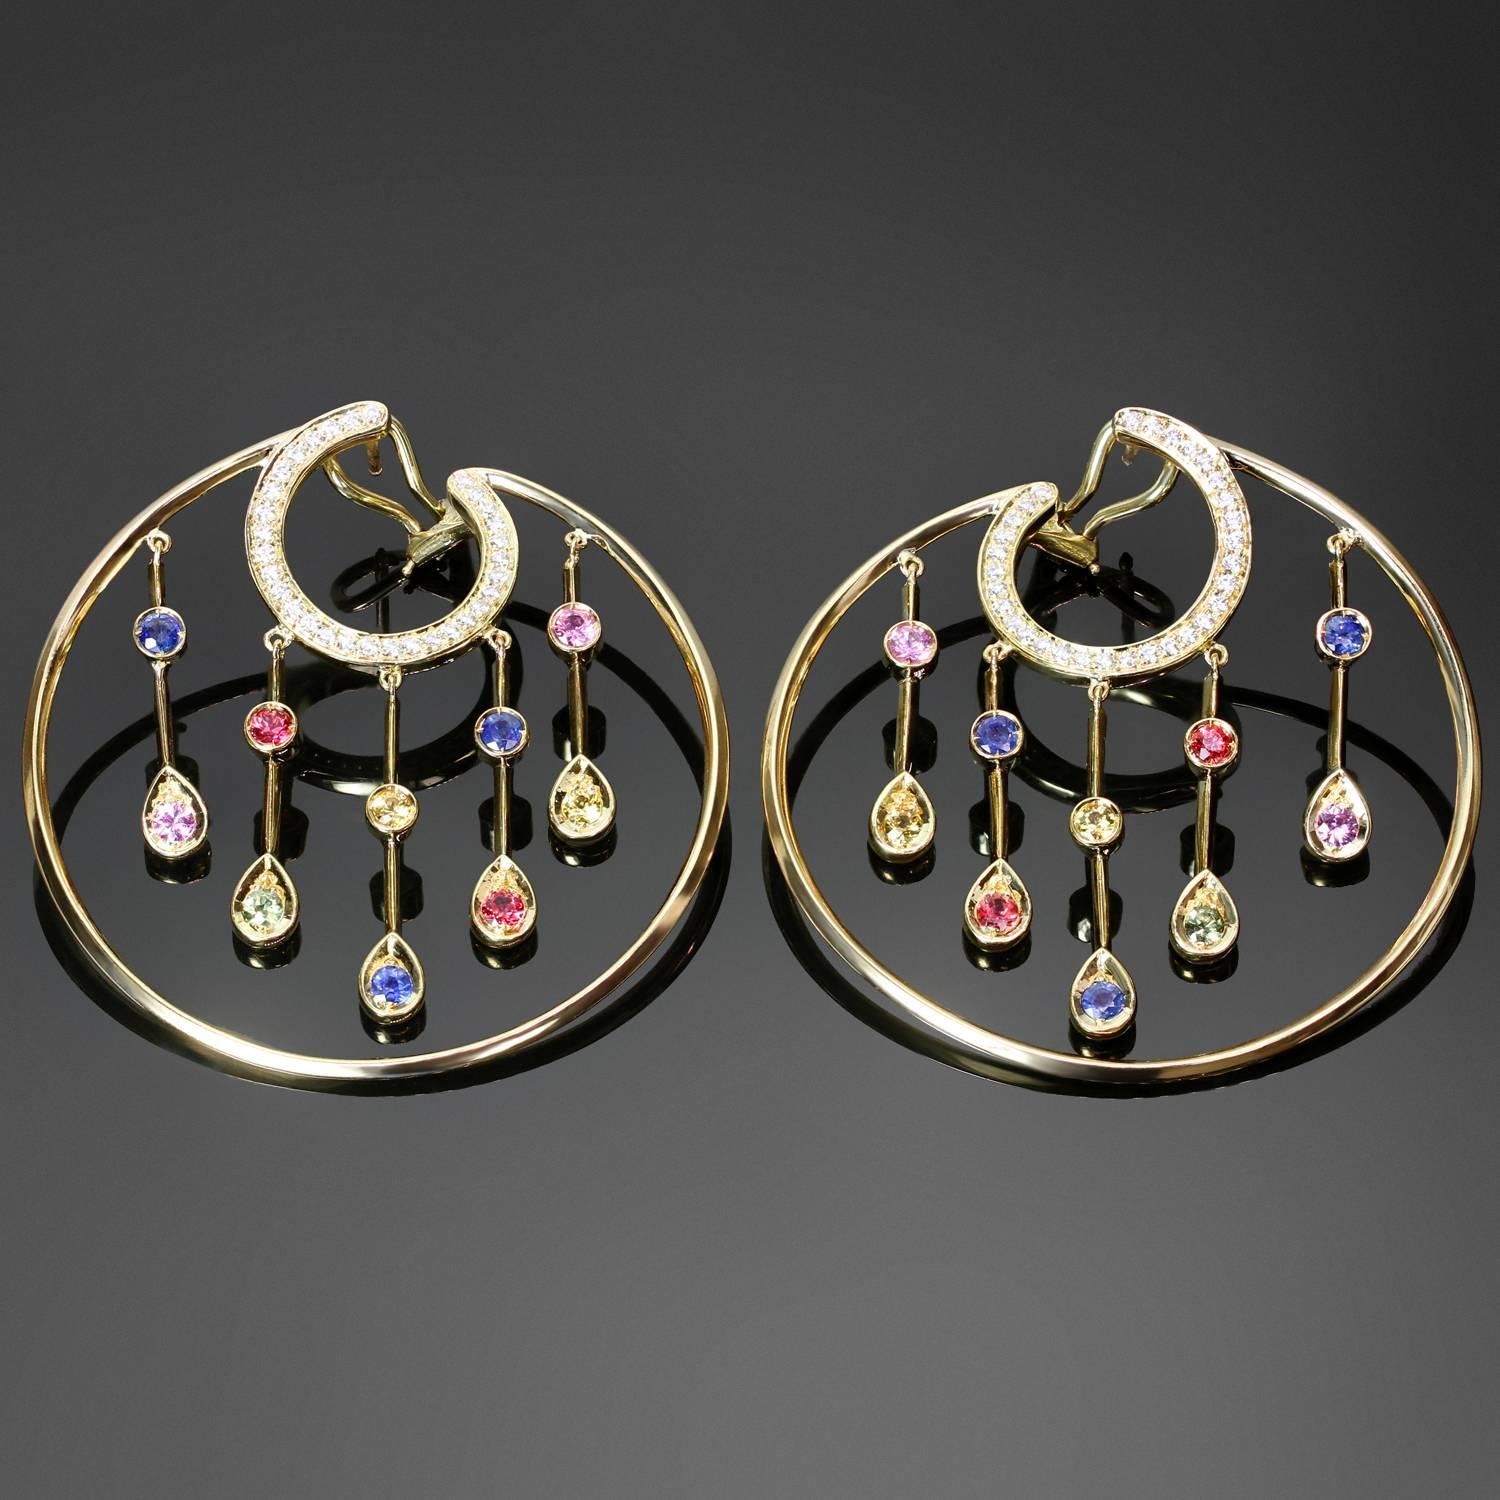 These gorgeous 18k yellow gold hoop earrings from the La Pluie collection by Chanel feature a circular design accented with dangling drops and are set with brilliant-cut round diamonds of an estimated 0.60 carats and colorful faceted round sapphires